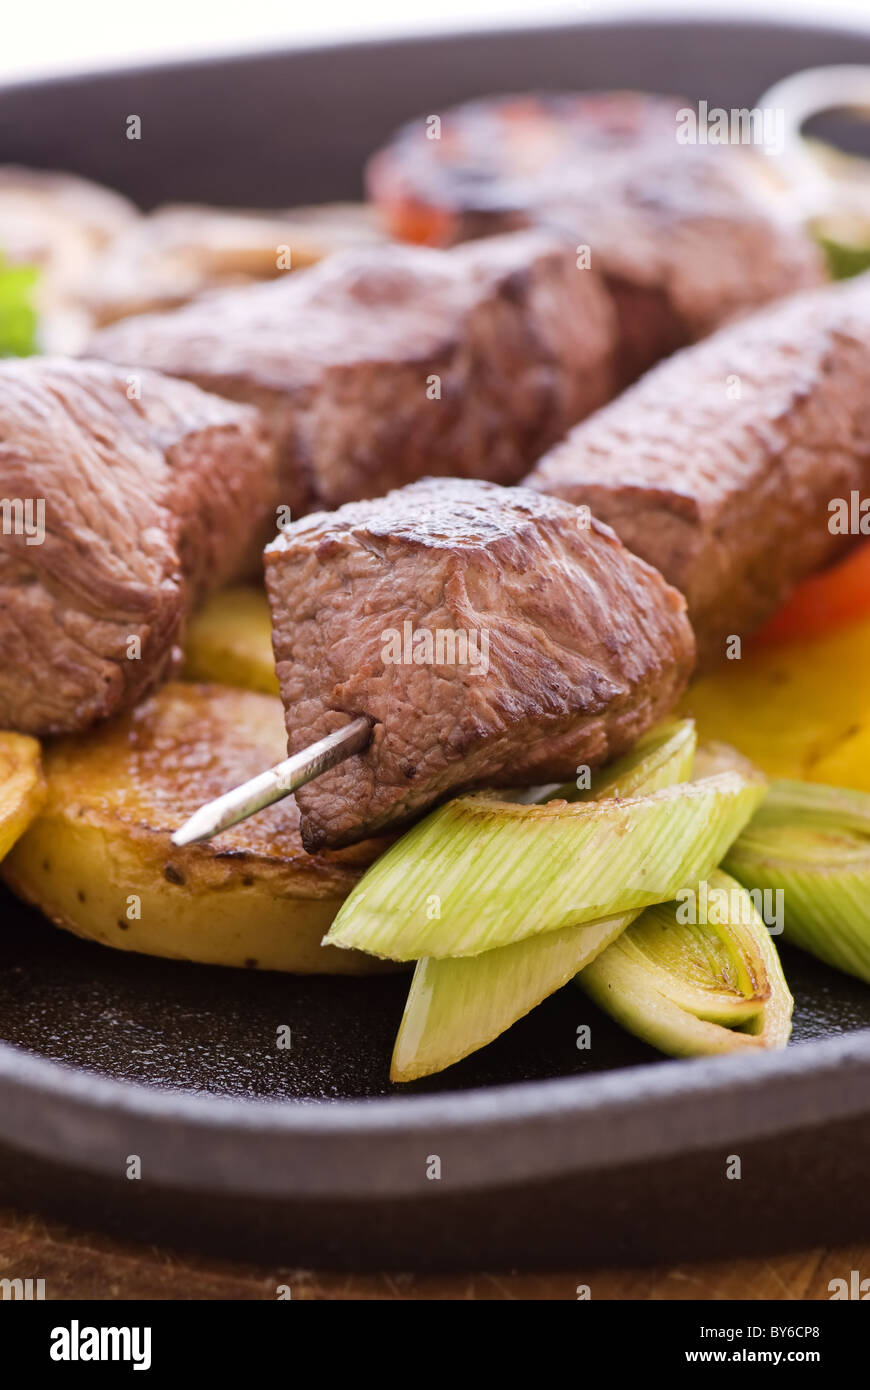 https://c8.alamy.com/comp/BY6CP8/grilled-meat-with-vegetable-BY6CP8.jpg